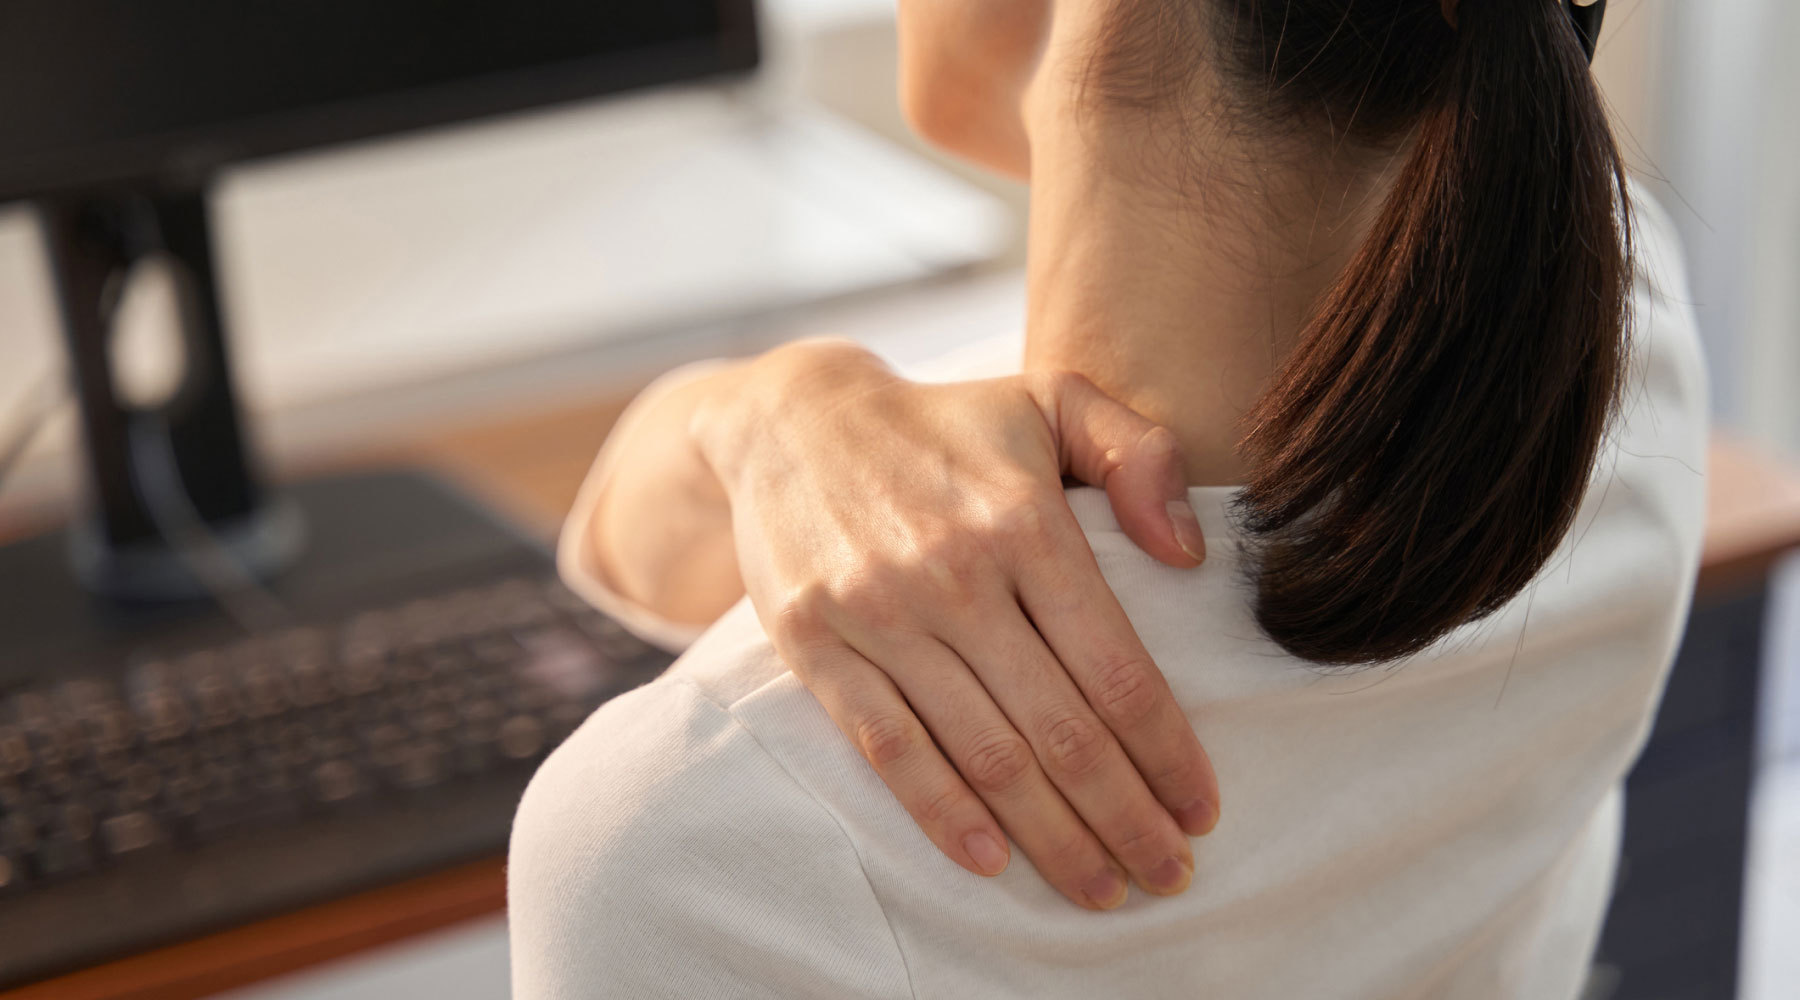 Repetitive Strain Injury Awareness: What You Need to Know